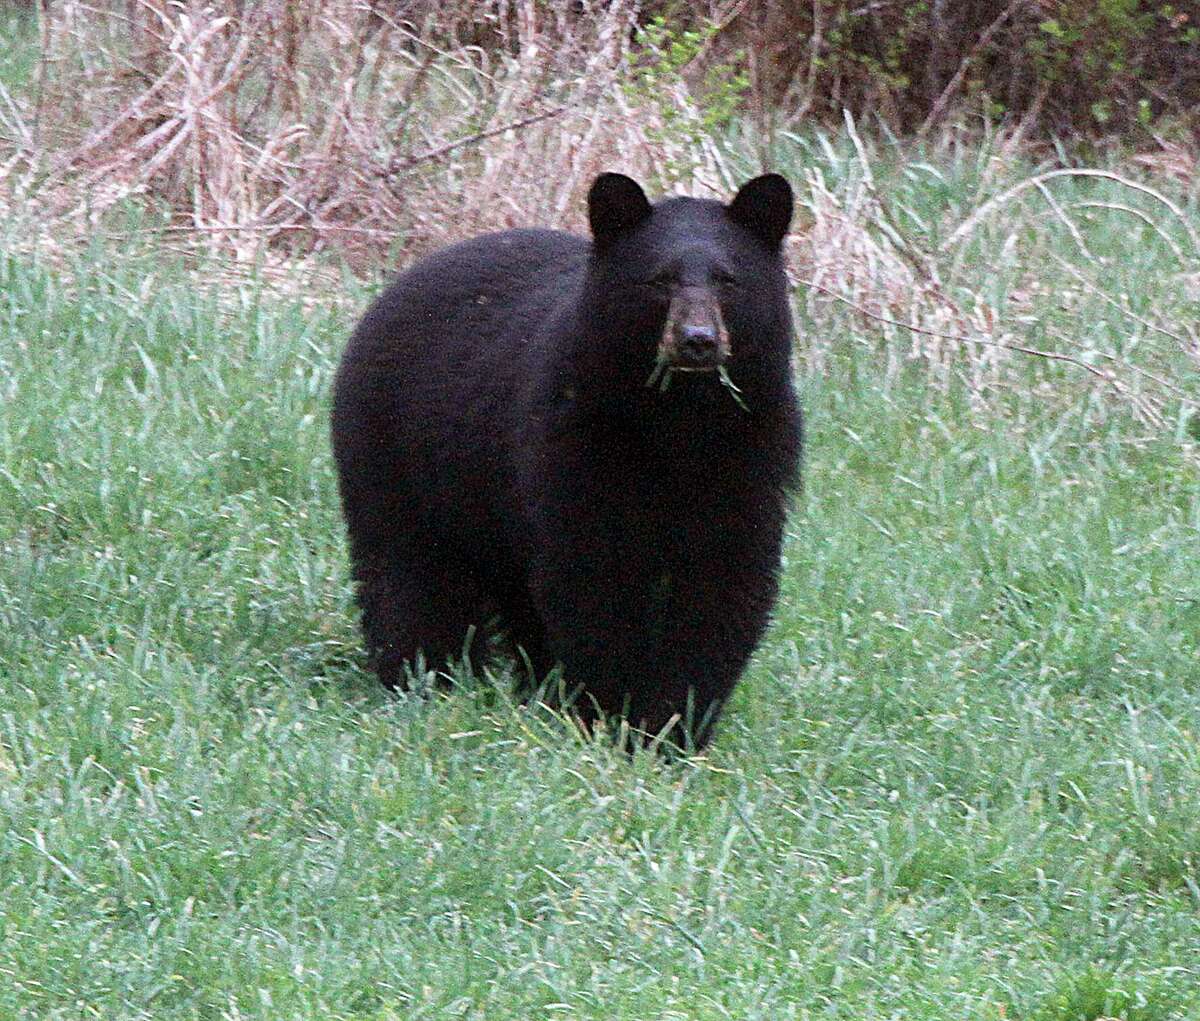 FILE - In this April 22, 2012 file photo, a black bear grazes in a field in Calais, Vt. A black bear attacked a 19-year-old staffer at a Colorado camp as he slept early Sunday, July 9, 2017. Black bears arenÂ?’t usually aggressive but they recently attacked a woman in a popular hiking area in Idaho and killed two people in Alaska. (AP Photo/Toby Talbot/File)